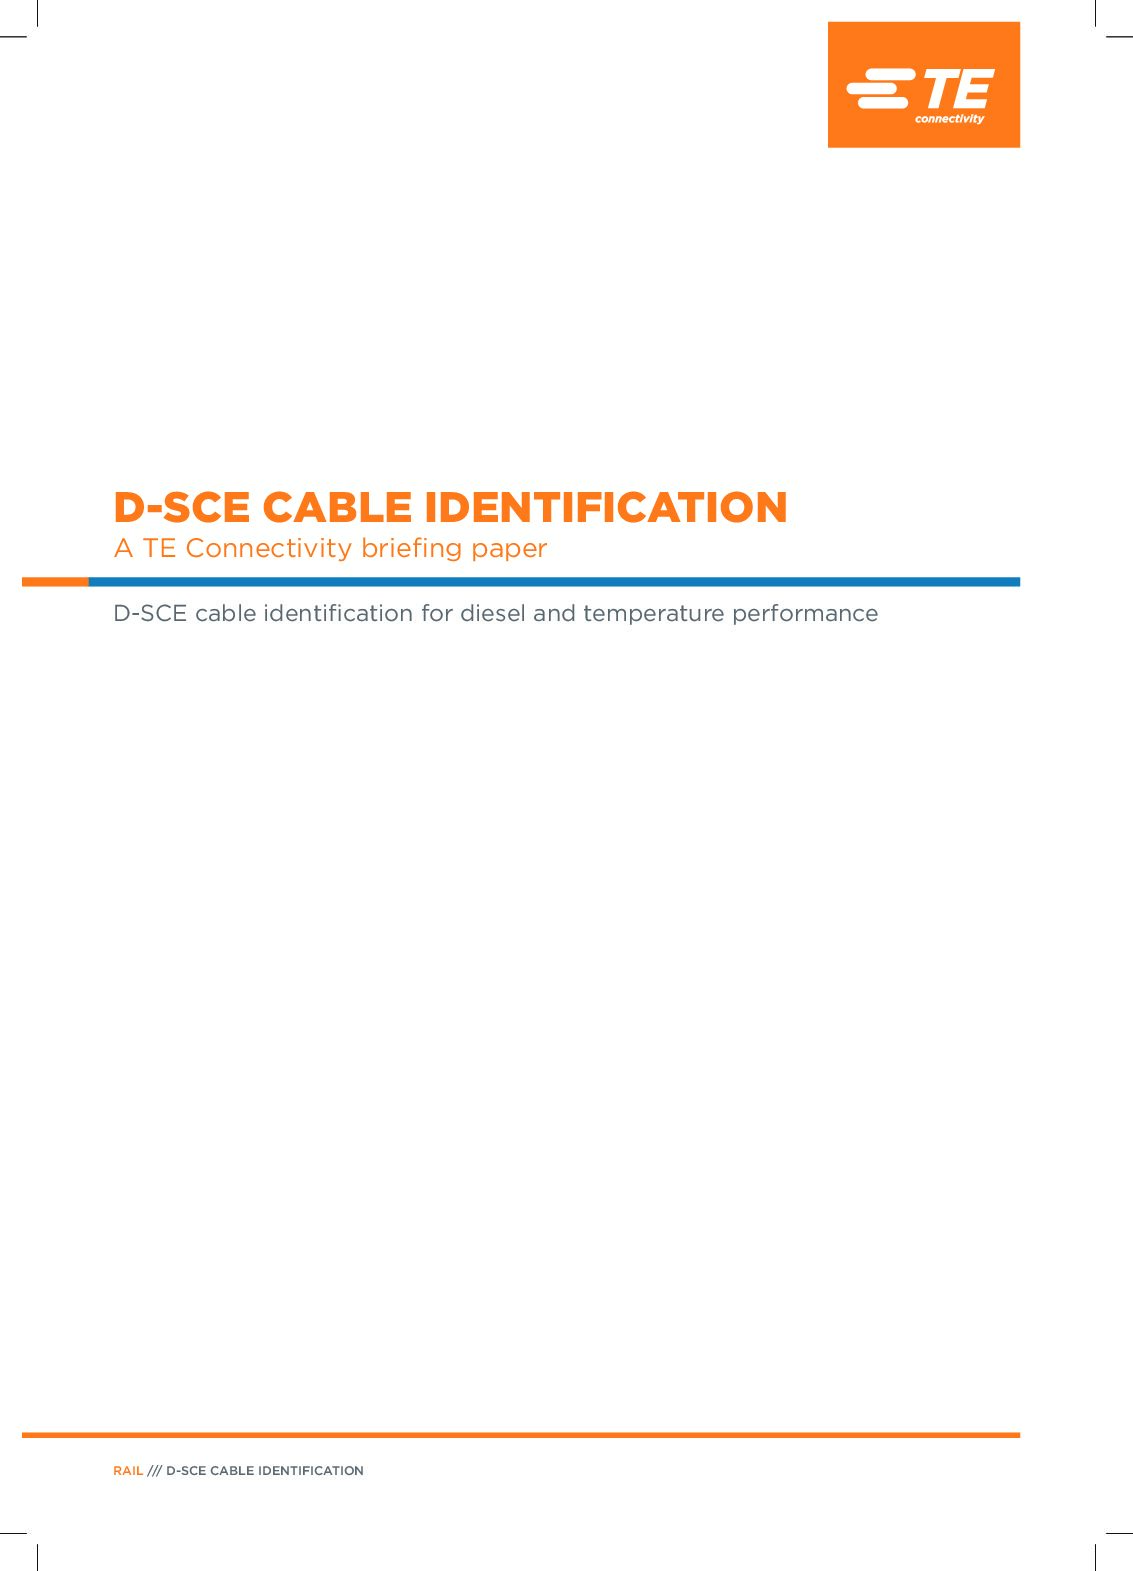 D-SCE Cable Identification